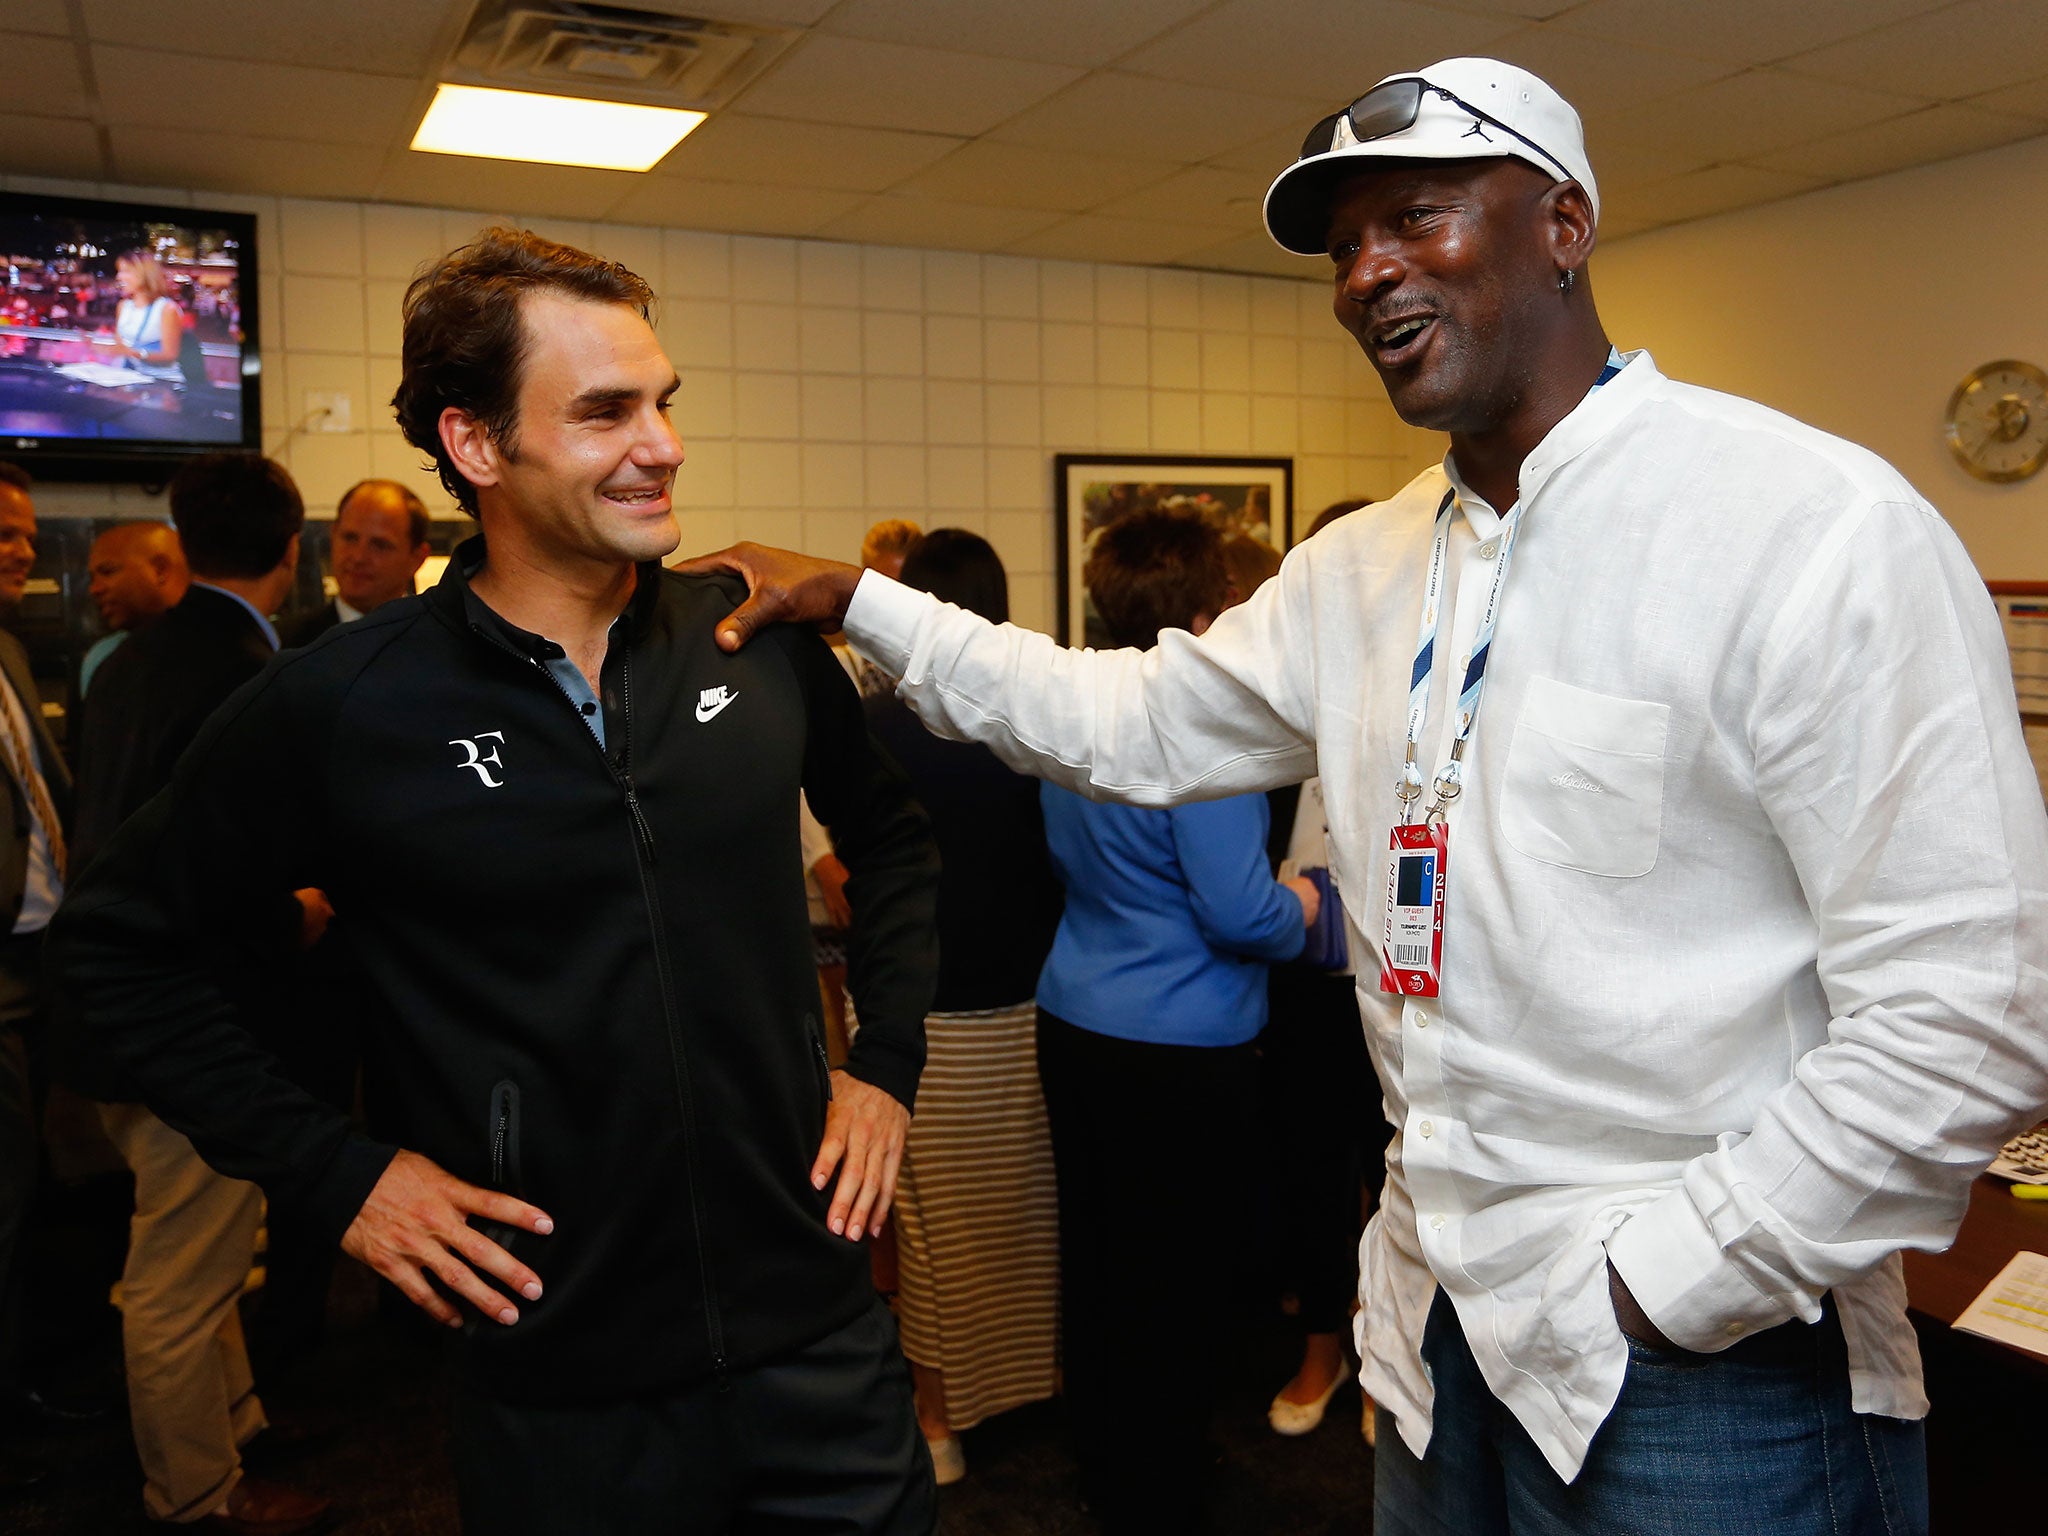 Roger Federer is greeted by Michael Jordan following his victory over Marinko Matosevic